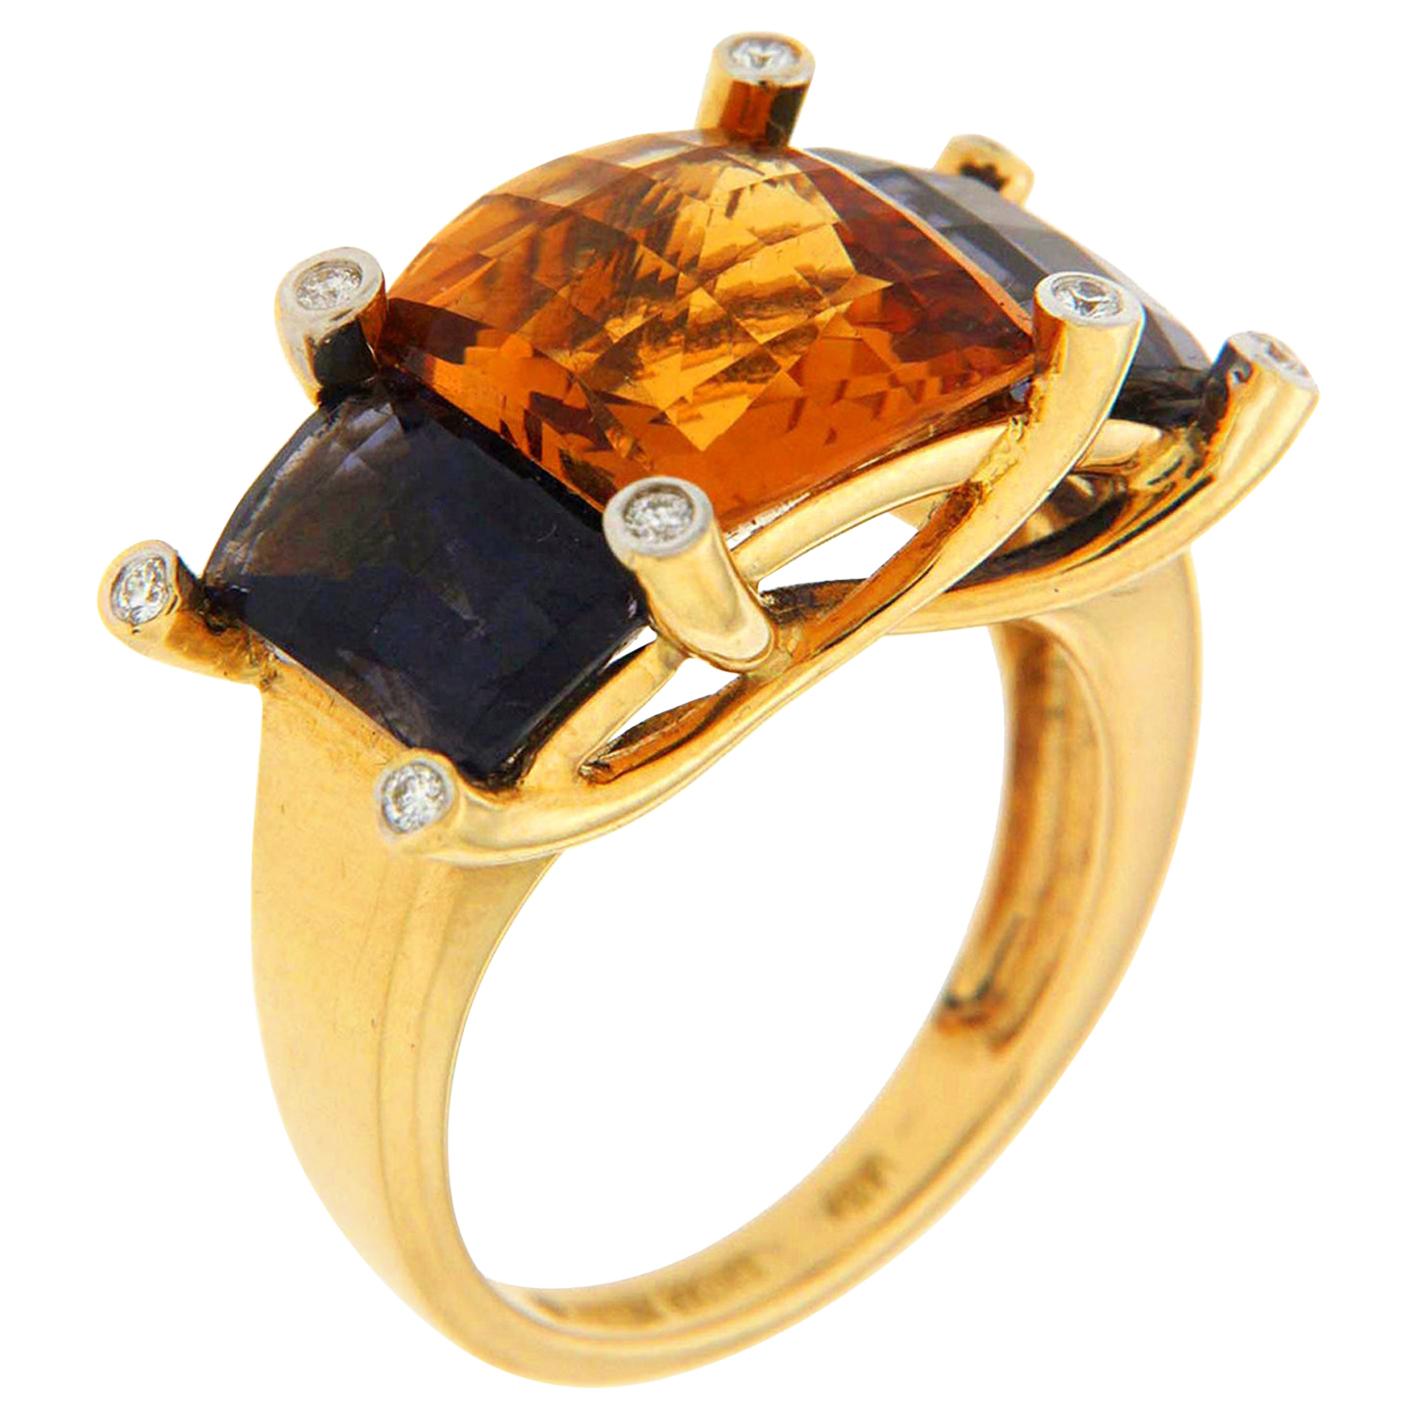 Valentin Magro Colori Citrine Iolite Diamond Gold Three-Stone Ring star secondary colors. Its central jewel is a Madeira citrine with a checkerboard surface. On either side are rectangular iolites. The gems rest in an 18k yellow gold band with